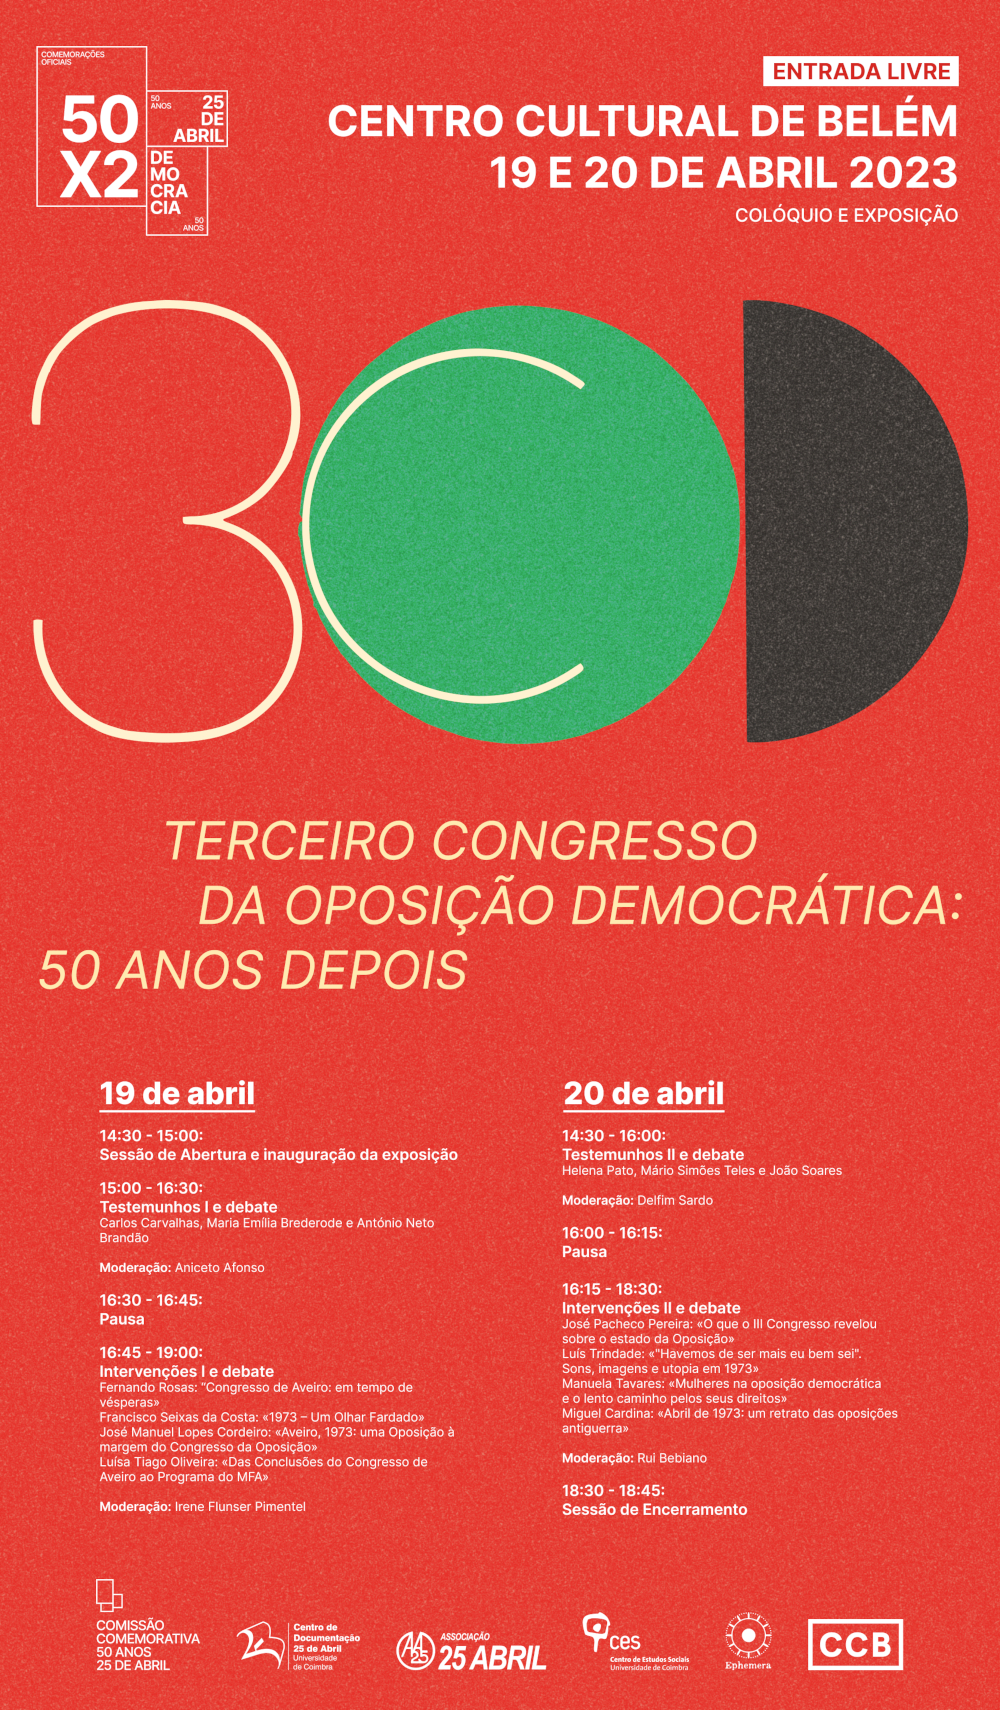 The Third Democratic Opposition Congress: 50 Years Later<span id="edit_42483"><script>$(function() { $('#edit_42483').load( "/myces/user/editobj.php?tipo=evento&id=42483" ); });</script></span>